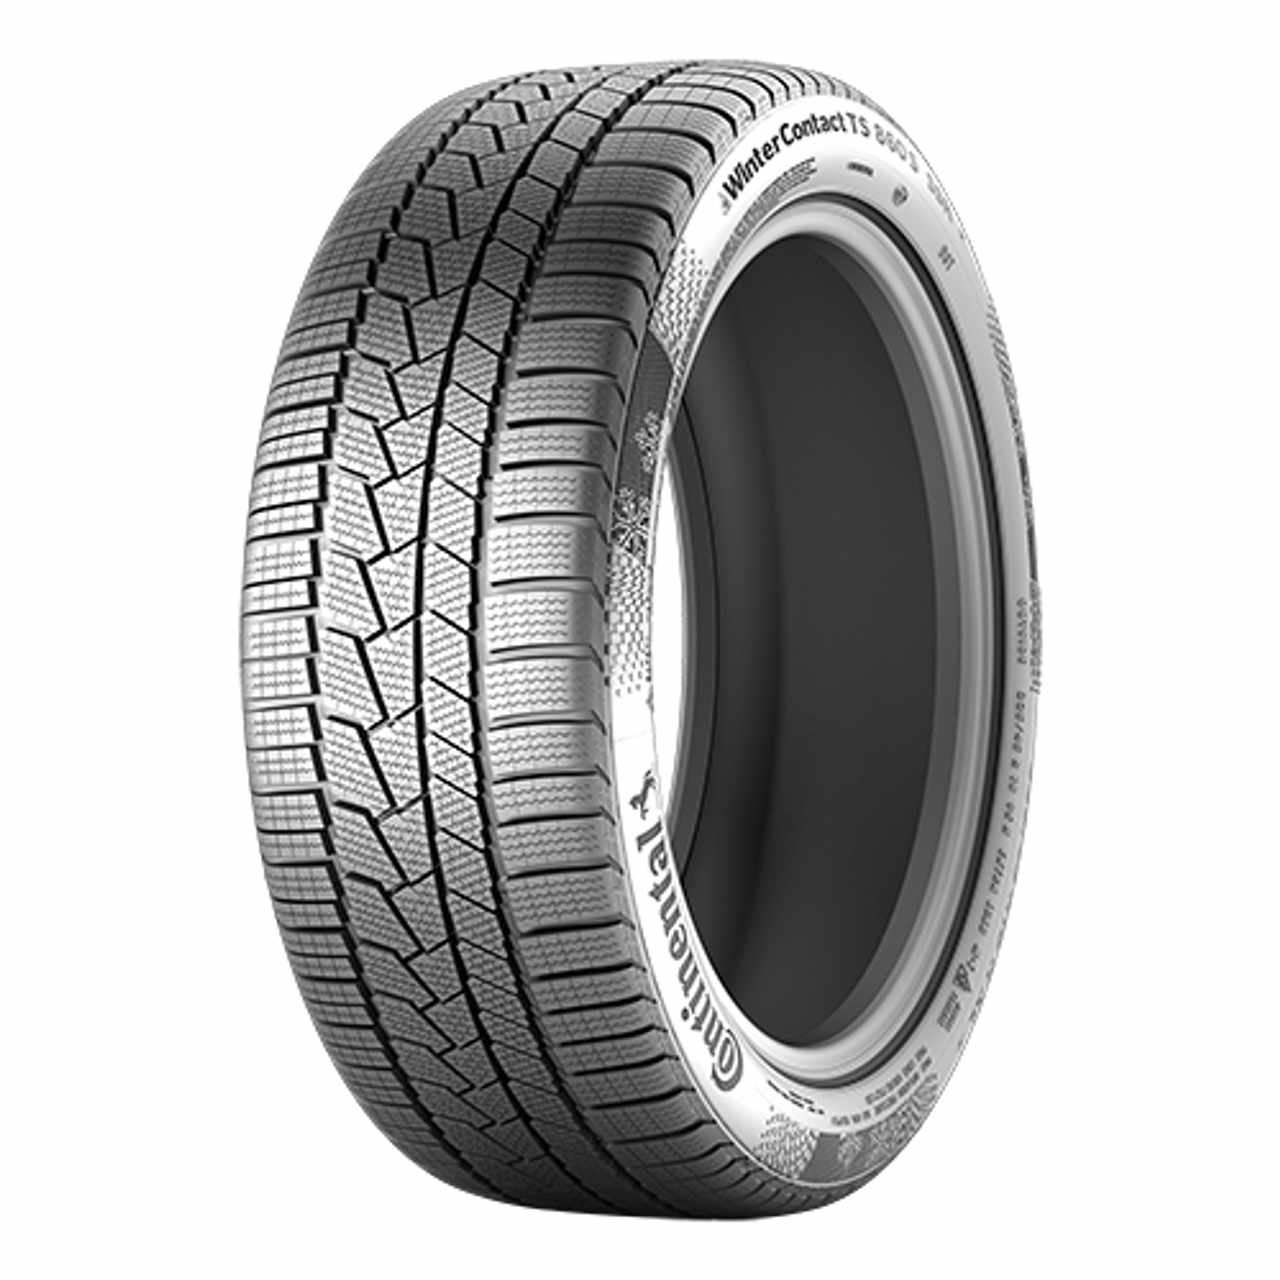 CONTINENTAL WINTERCONTACT TS 860 S (*) (EVc) 205/45R18 90H FR BSW XL